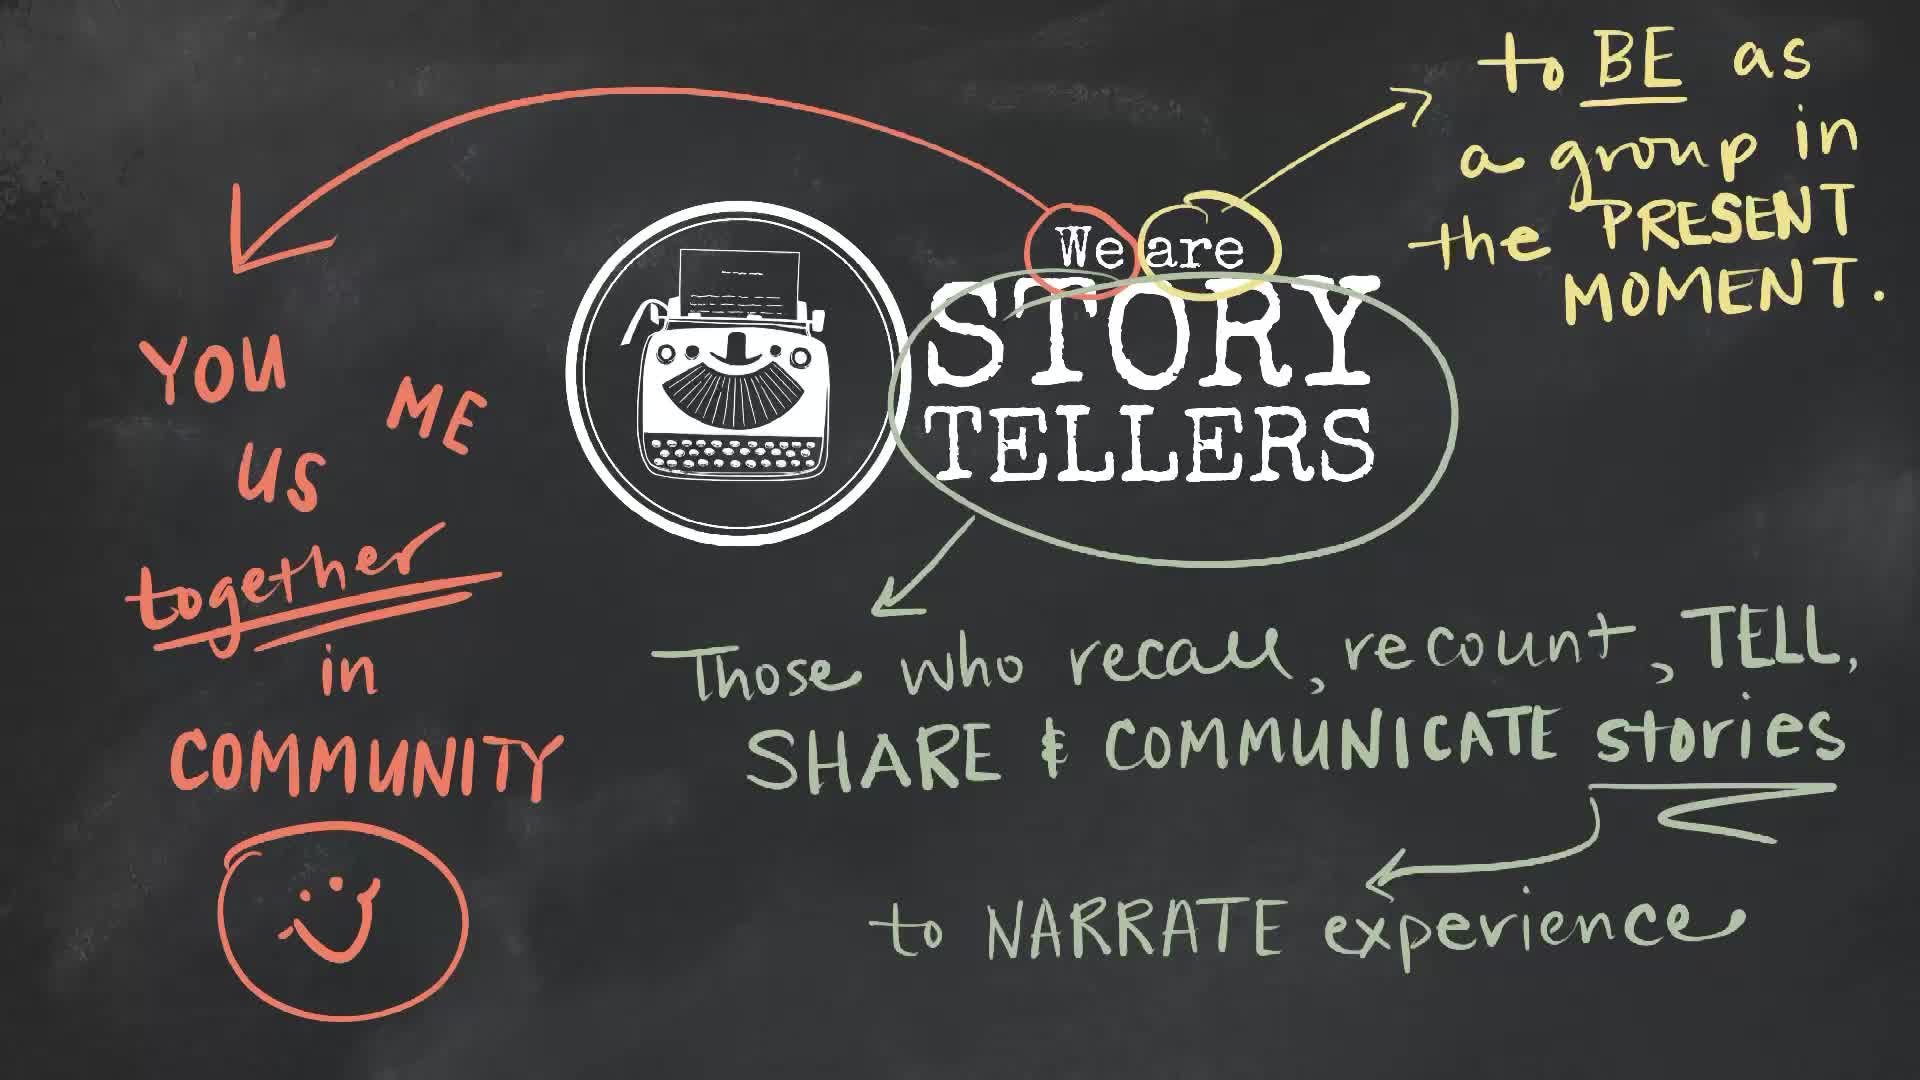 We are storytellers video thumbnail